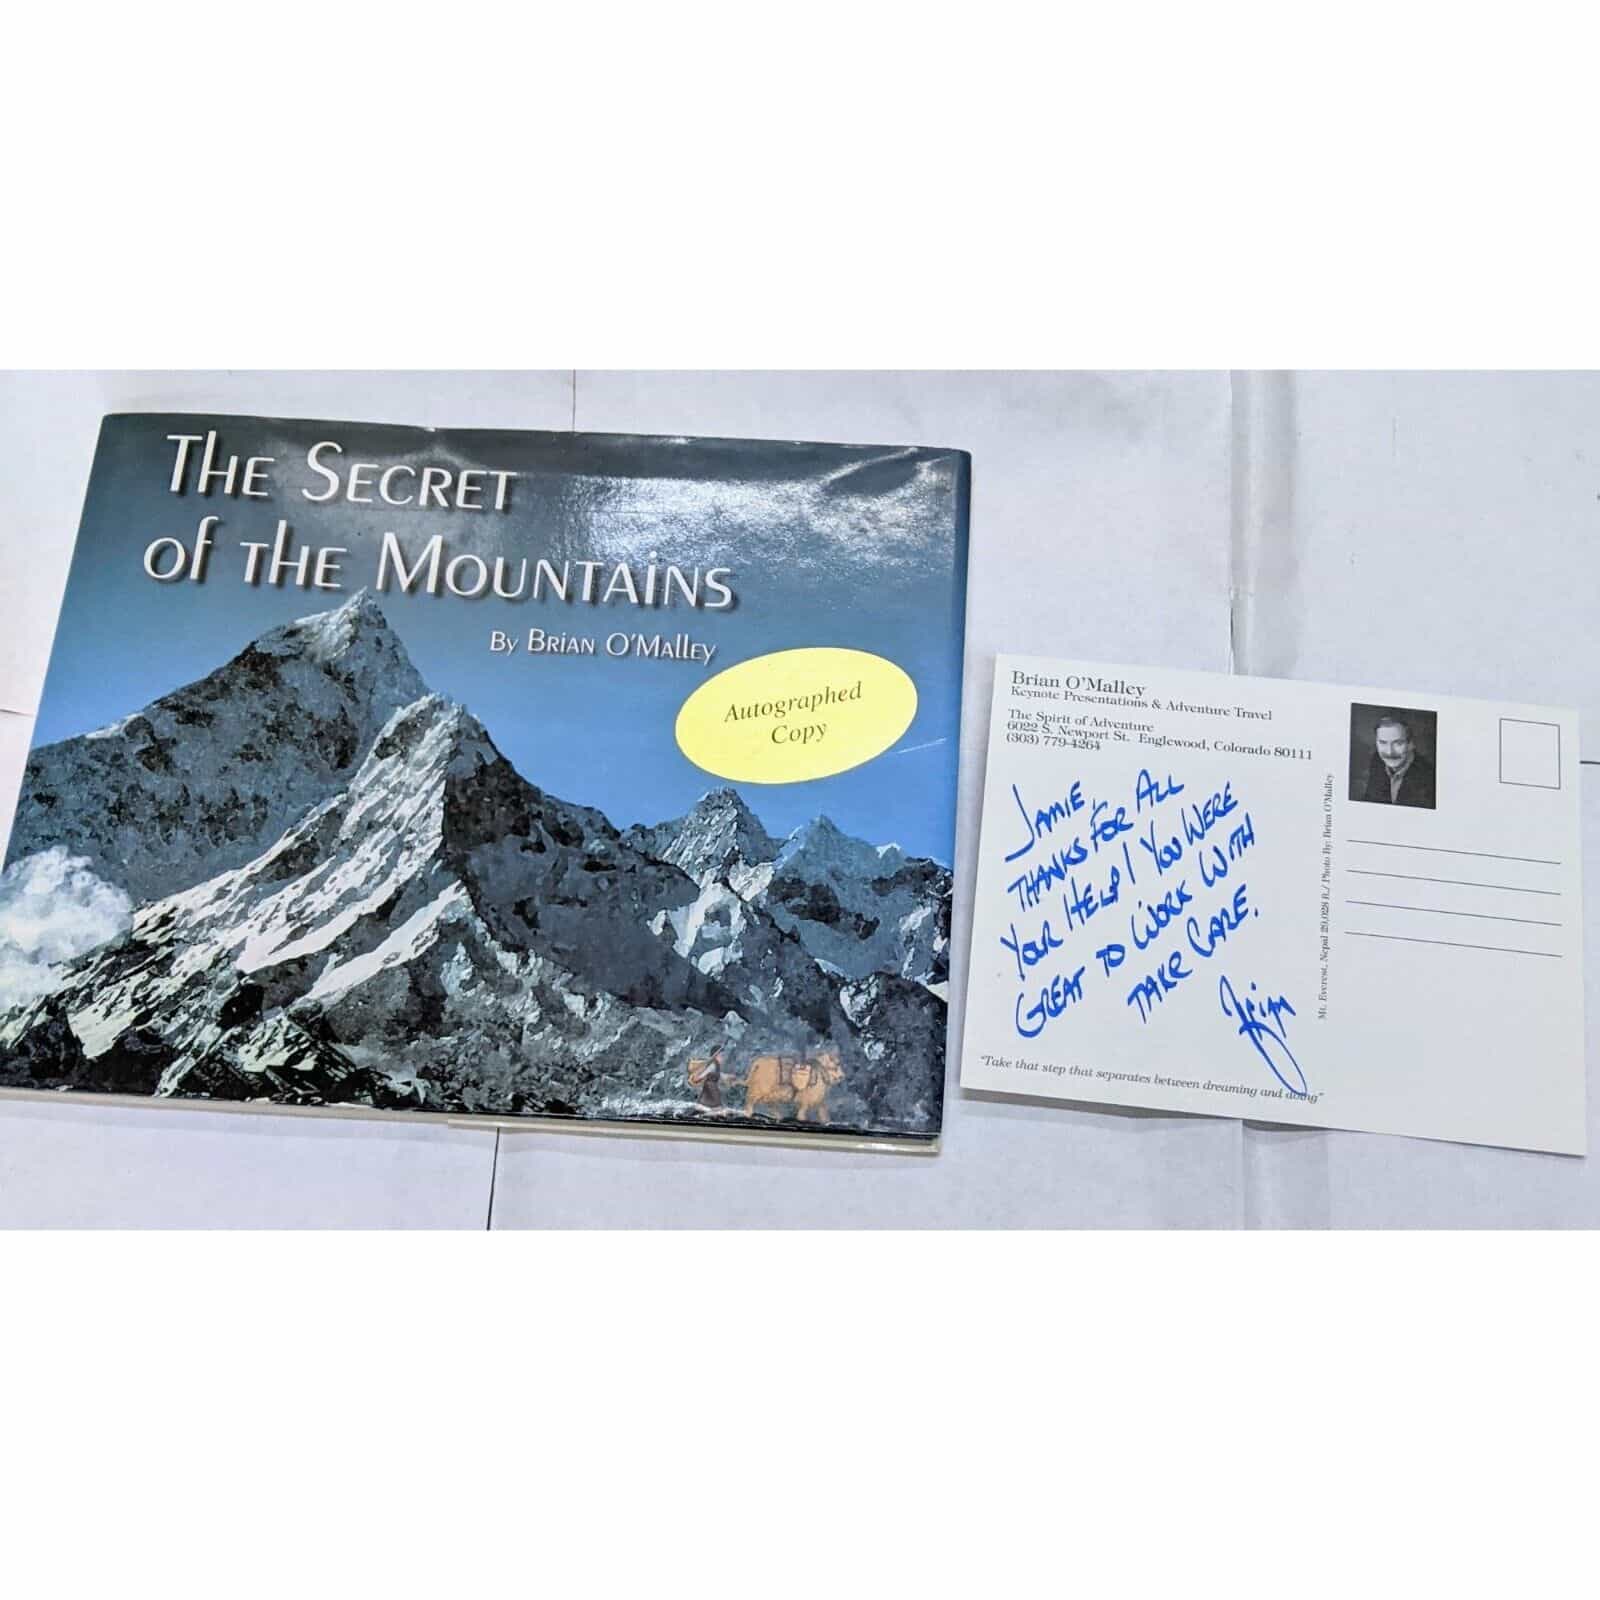 The Secret of The Mountains by Brian O’Malley Book (autographed copy)